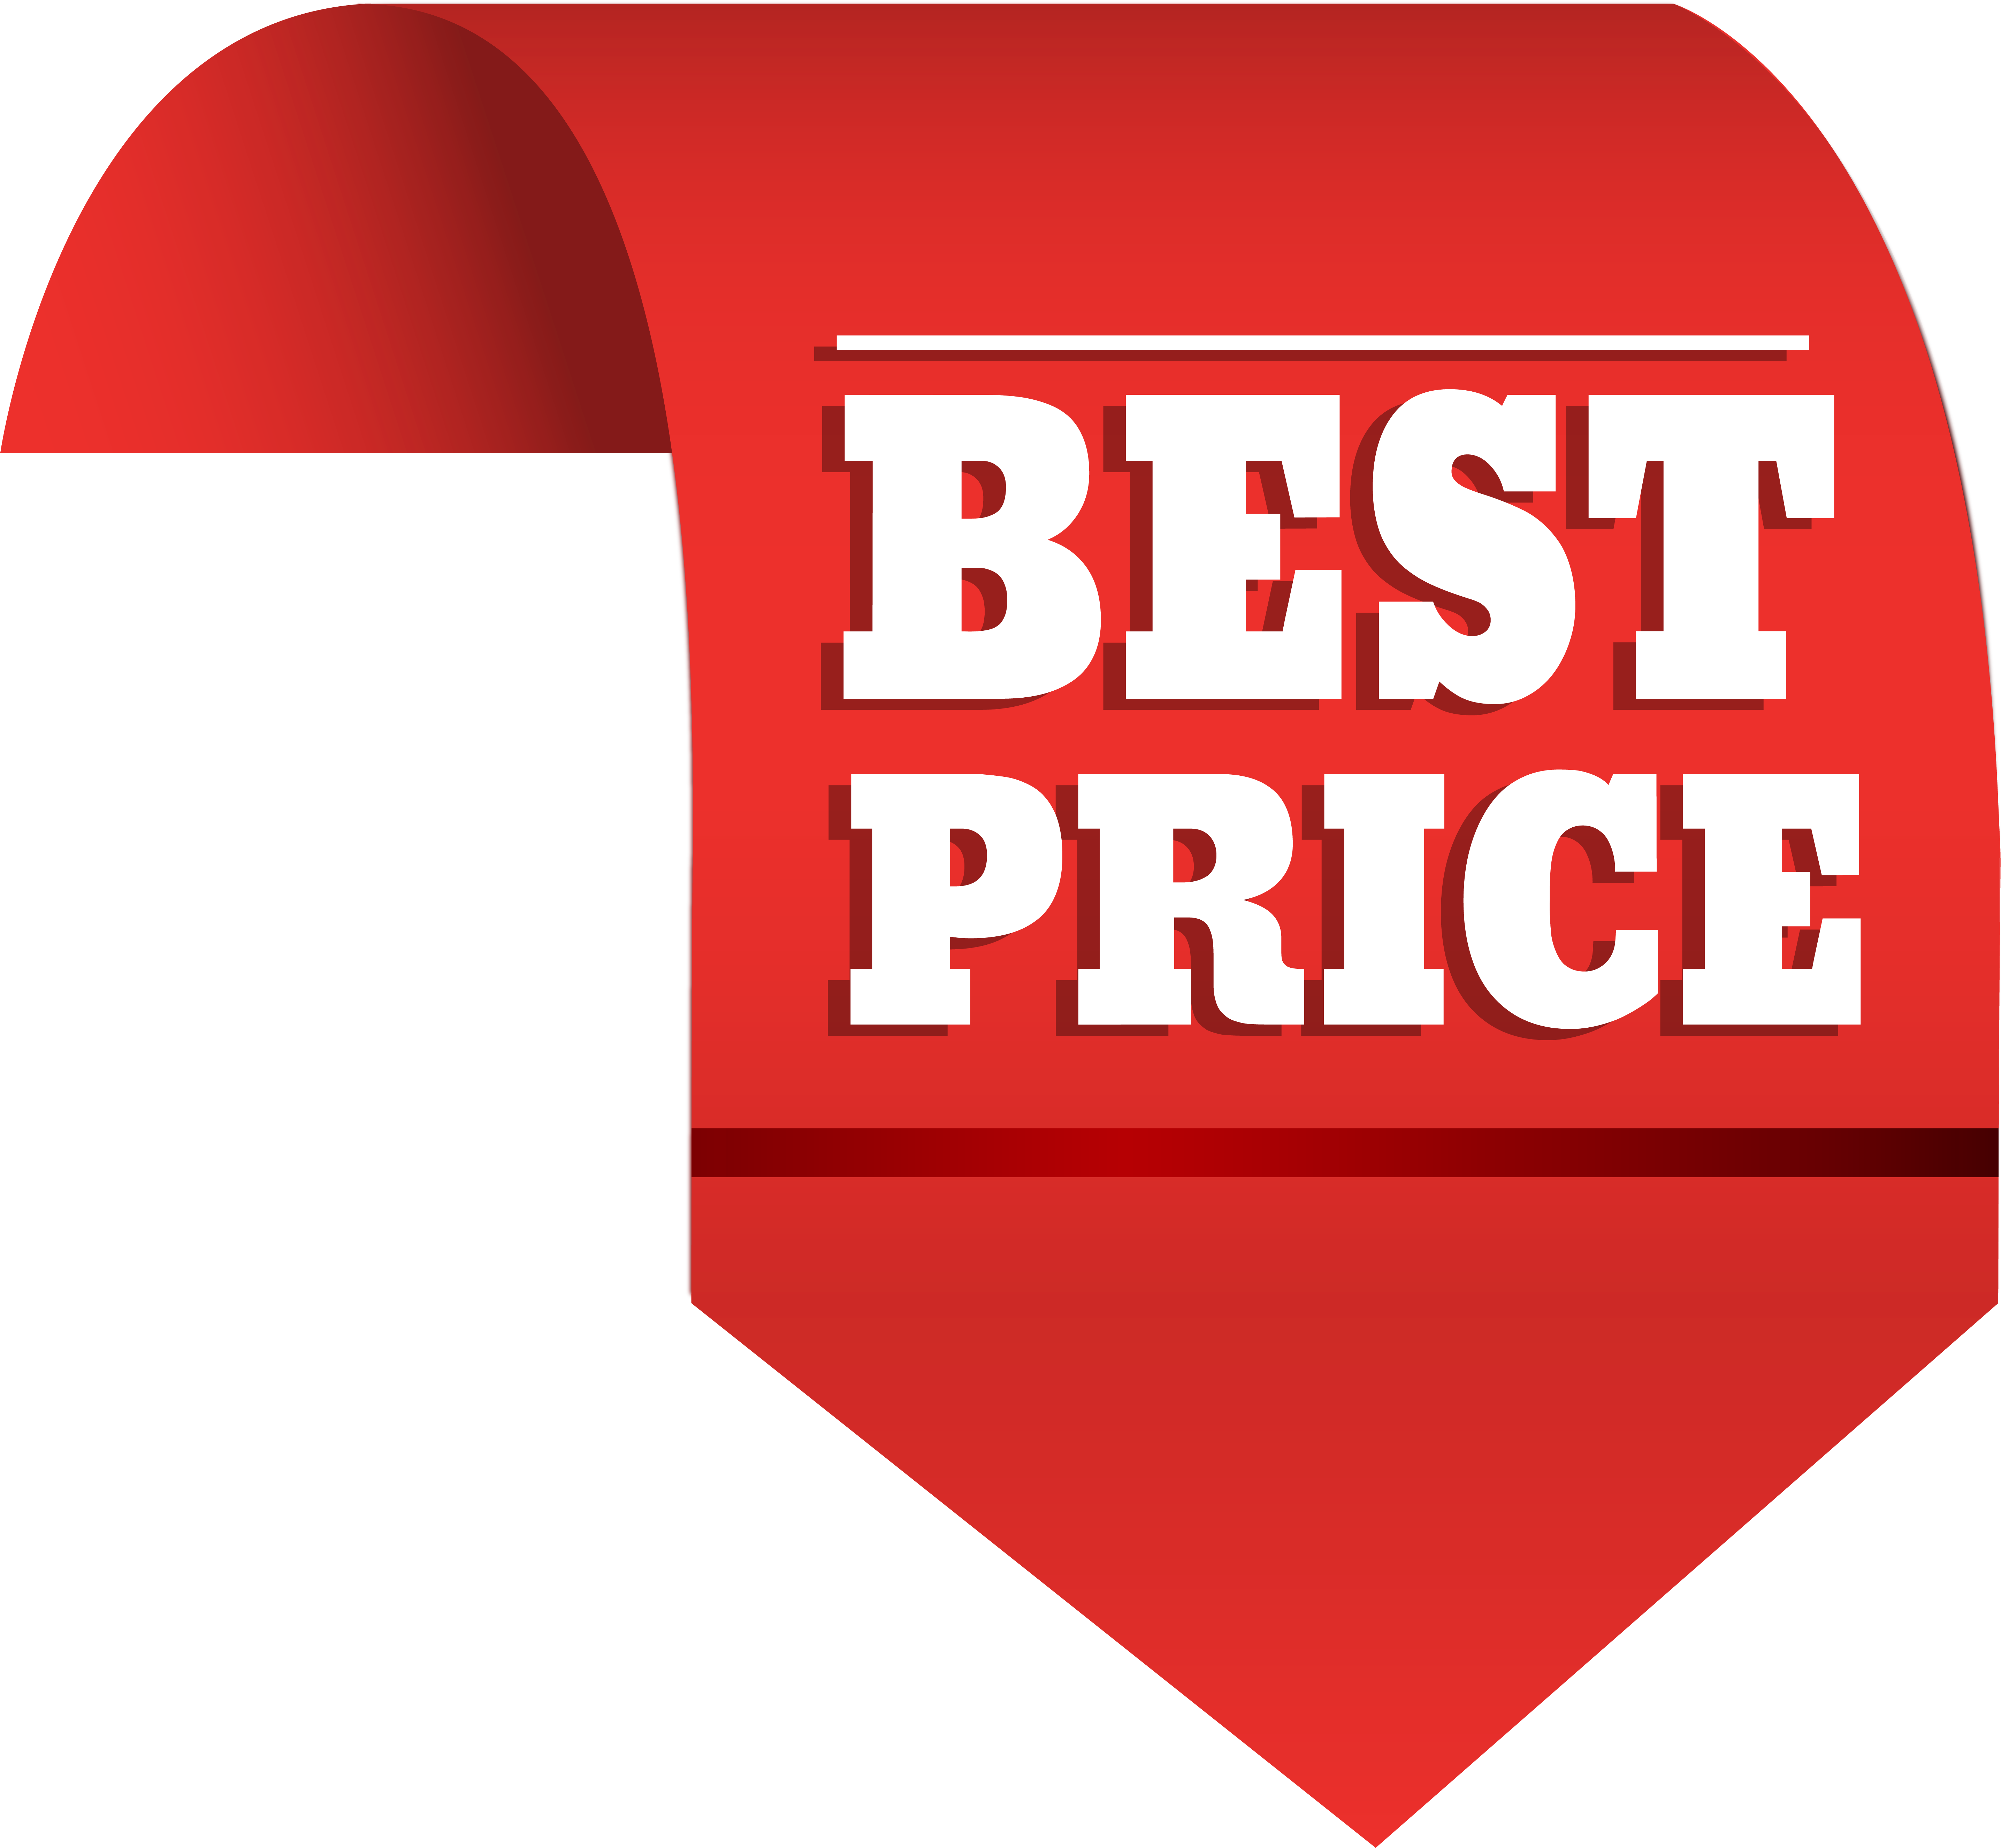 Free Price Tags Png, Download Free Price Tags Png png images, Free ...